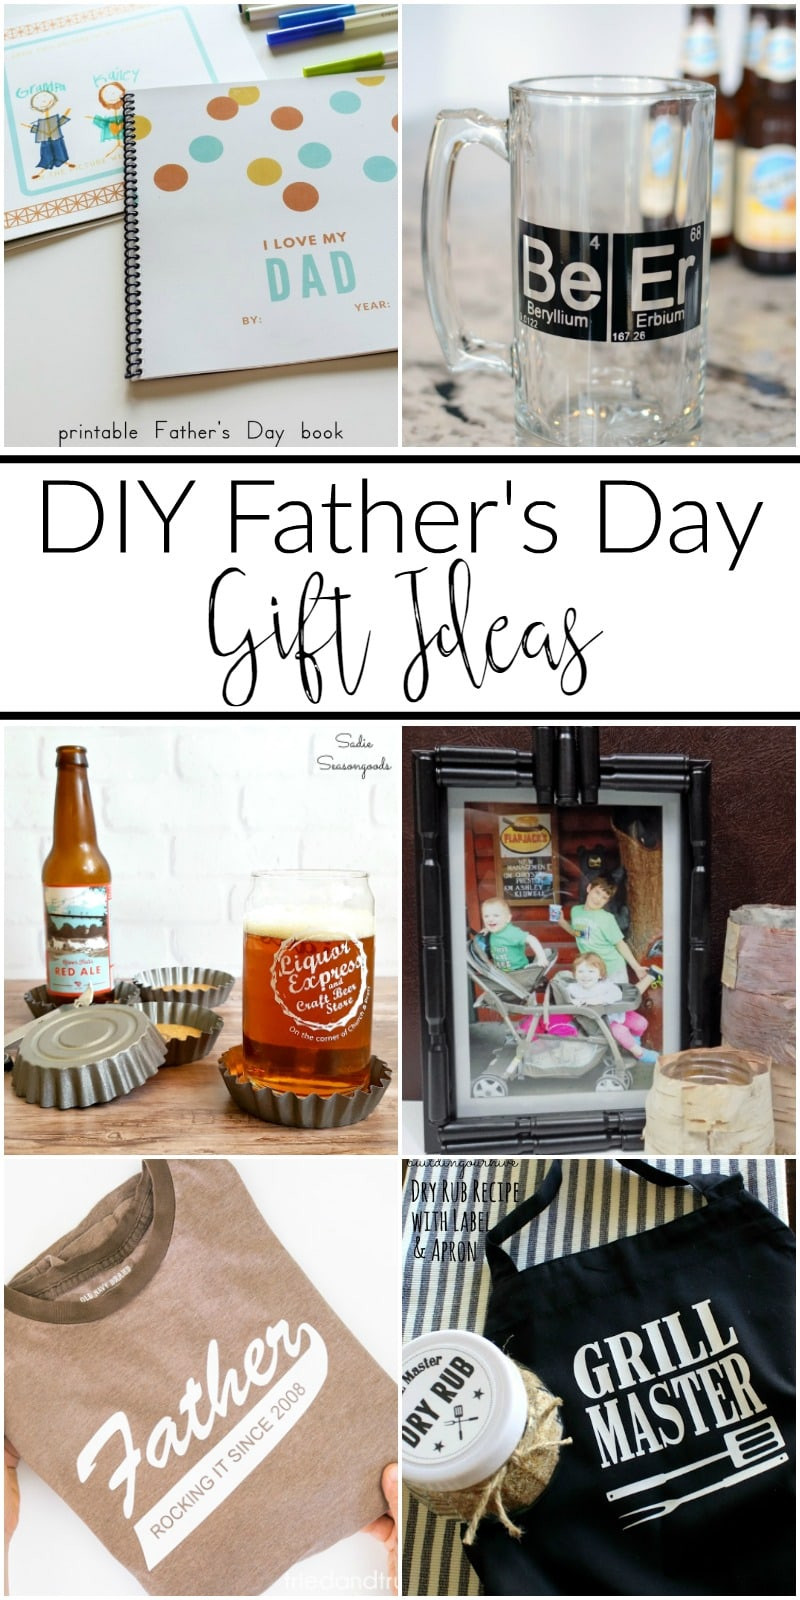 Pinterest Fathers Day Ideas
 DIY Father s Day Gift Ideas MM 157